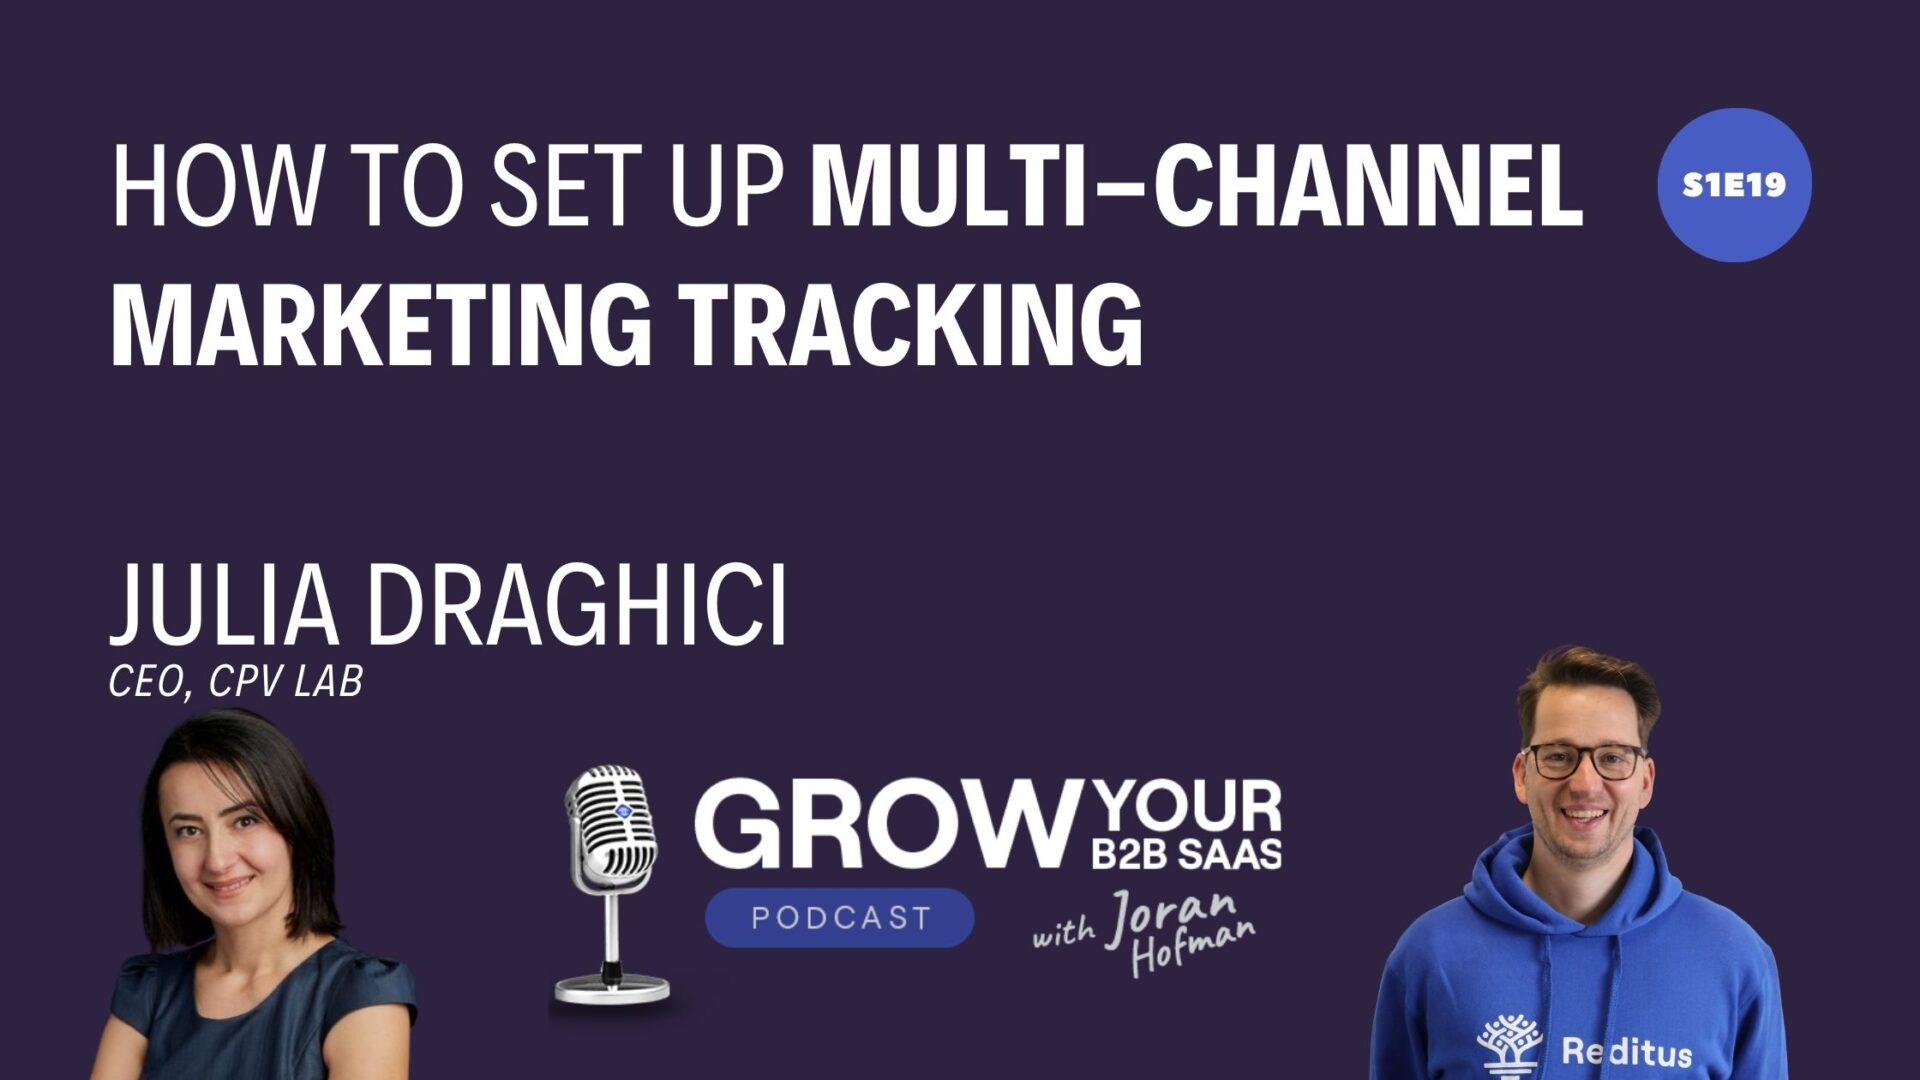 https://www.getreditus.com/podcast/s1e19-how-to-set-up-multi-channel-marketing-tracking-with-julia-draghici/